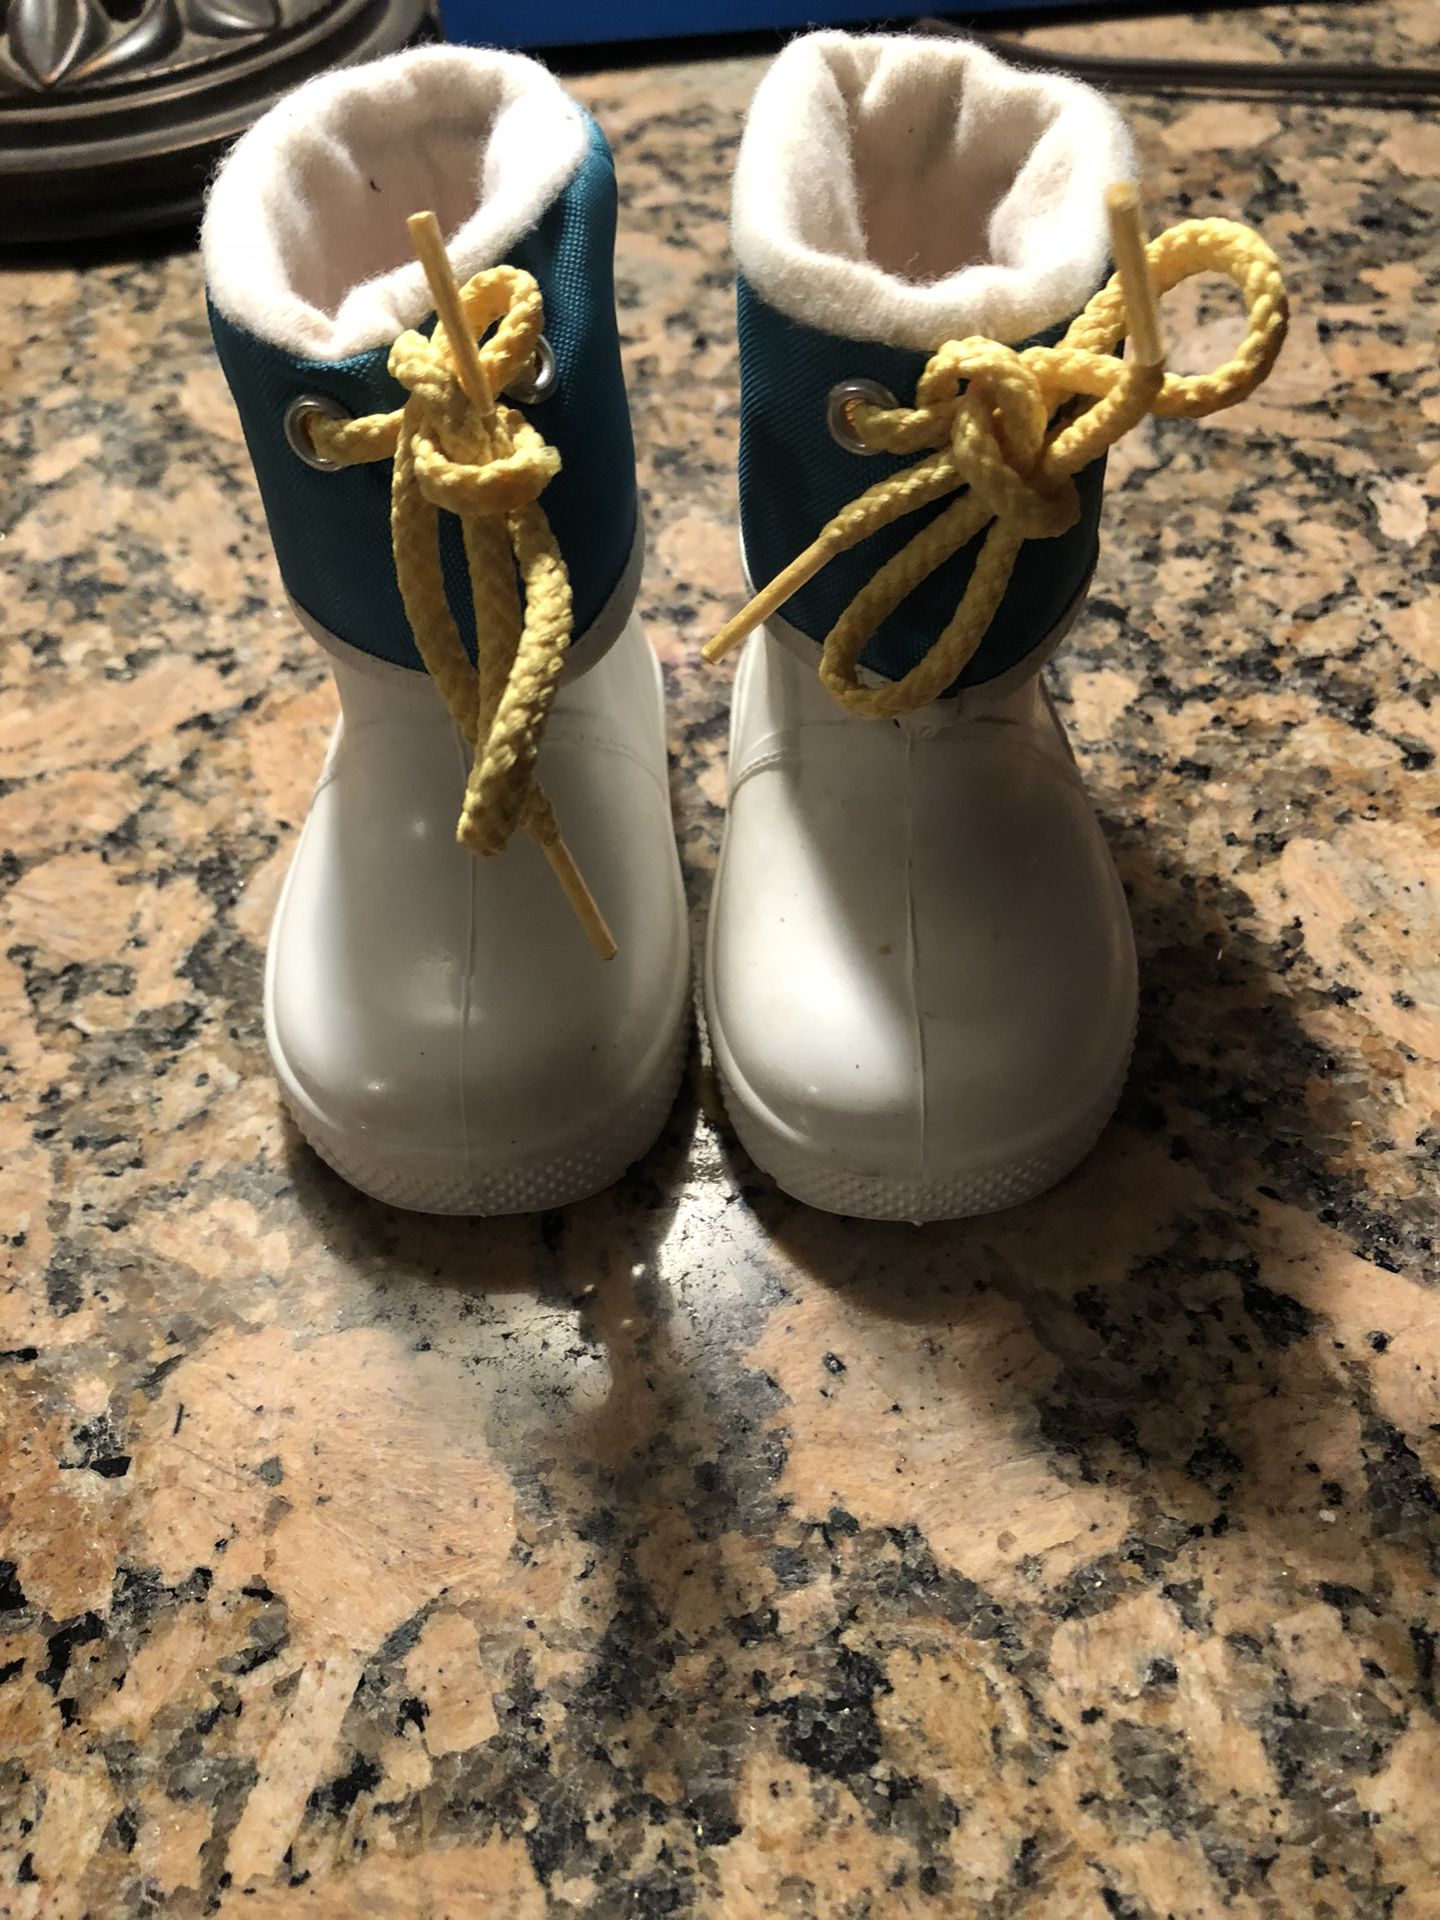 Baby’s first boot rain/snow boots sz 0-1